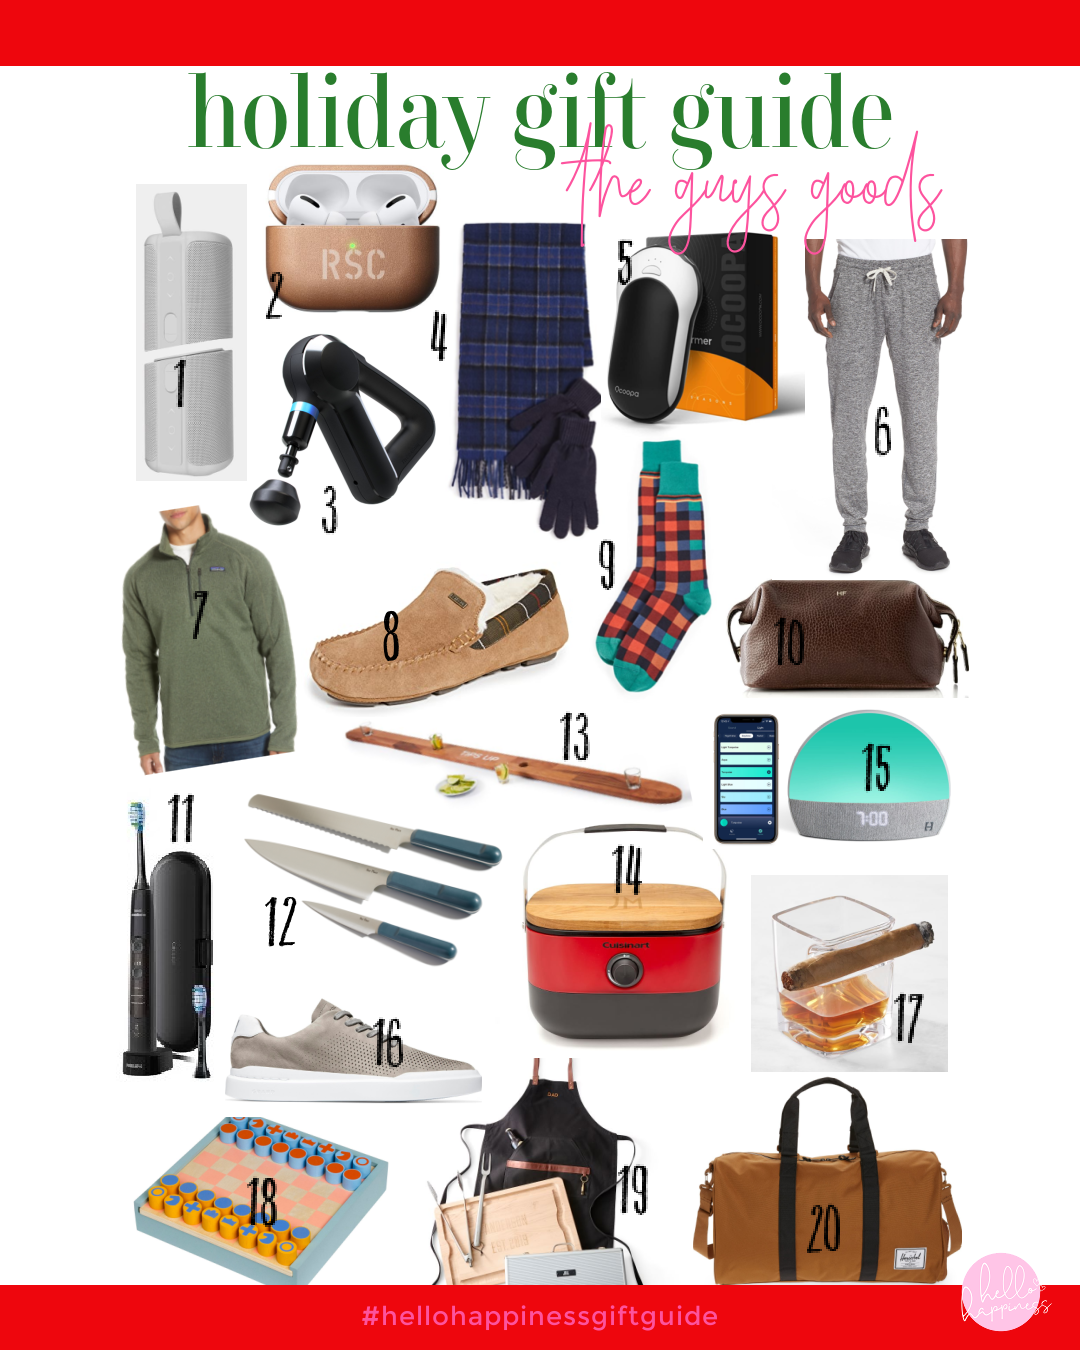 unique gift ideas for him, a 2021 gift guide by top Nashville lifestyle blogger, Hello Happiness.